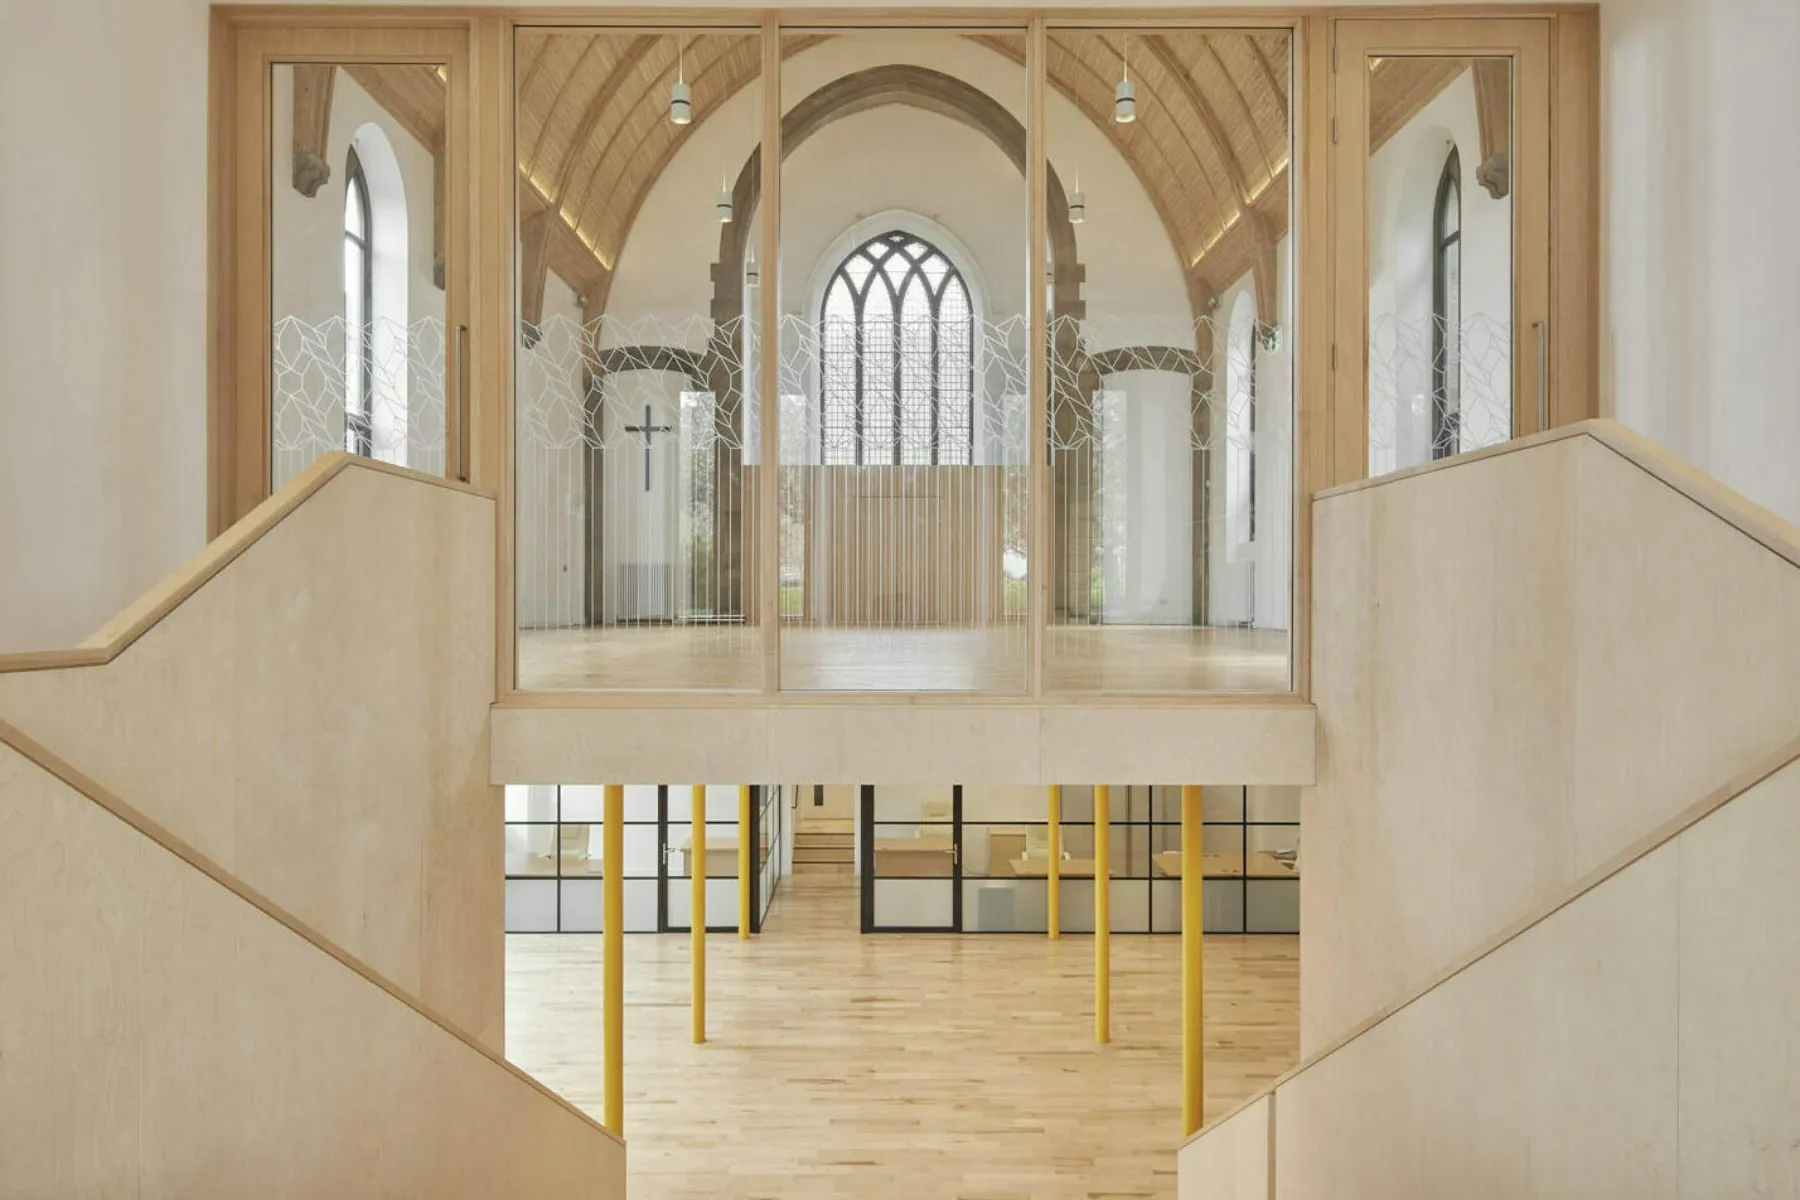 Inside the newly refurbished Greyfriars Charteris Centre in Edinburgh. Original features and details have been conserved and repaired an new, contemporary additions have been made - shown is a new timber staircase connecting the upper space in the old church with a lower, flexible and modernised space. Timber is extensively used throughout and the photograph shows both levels of the building.